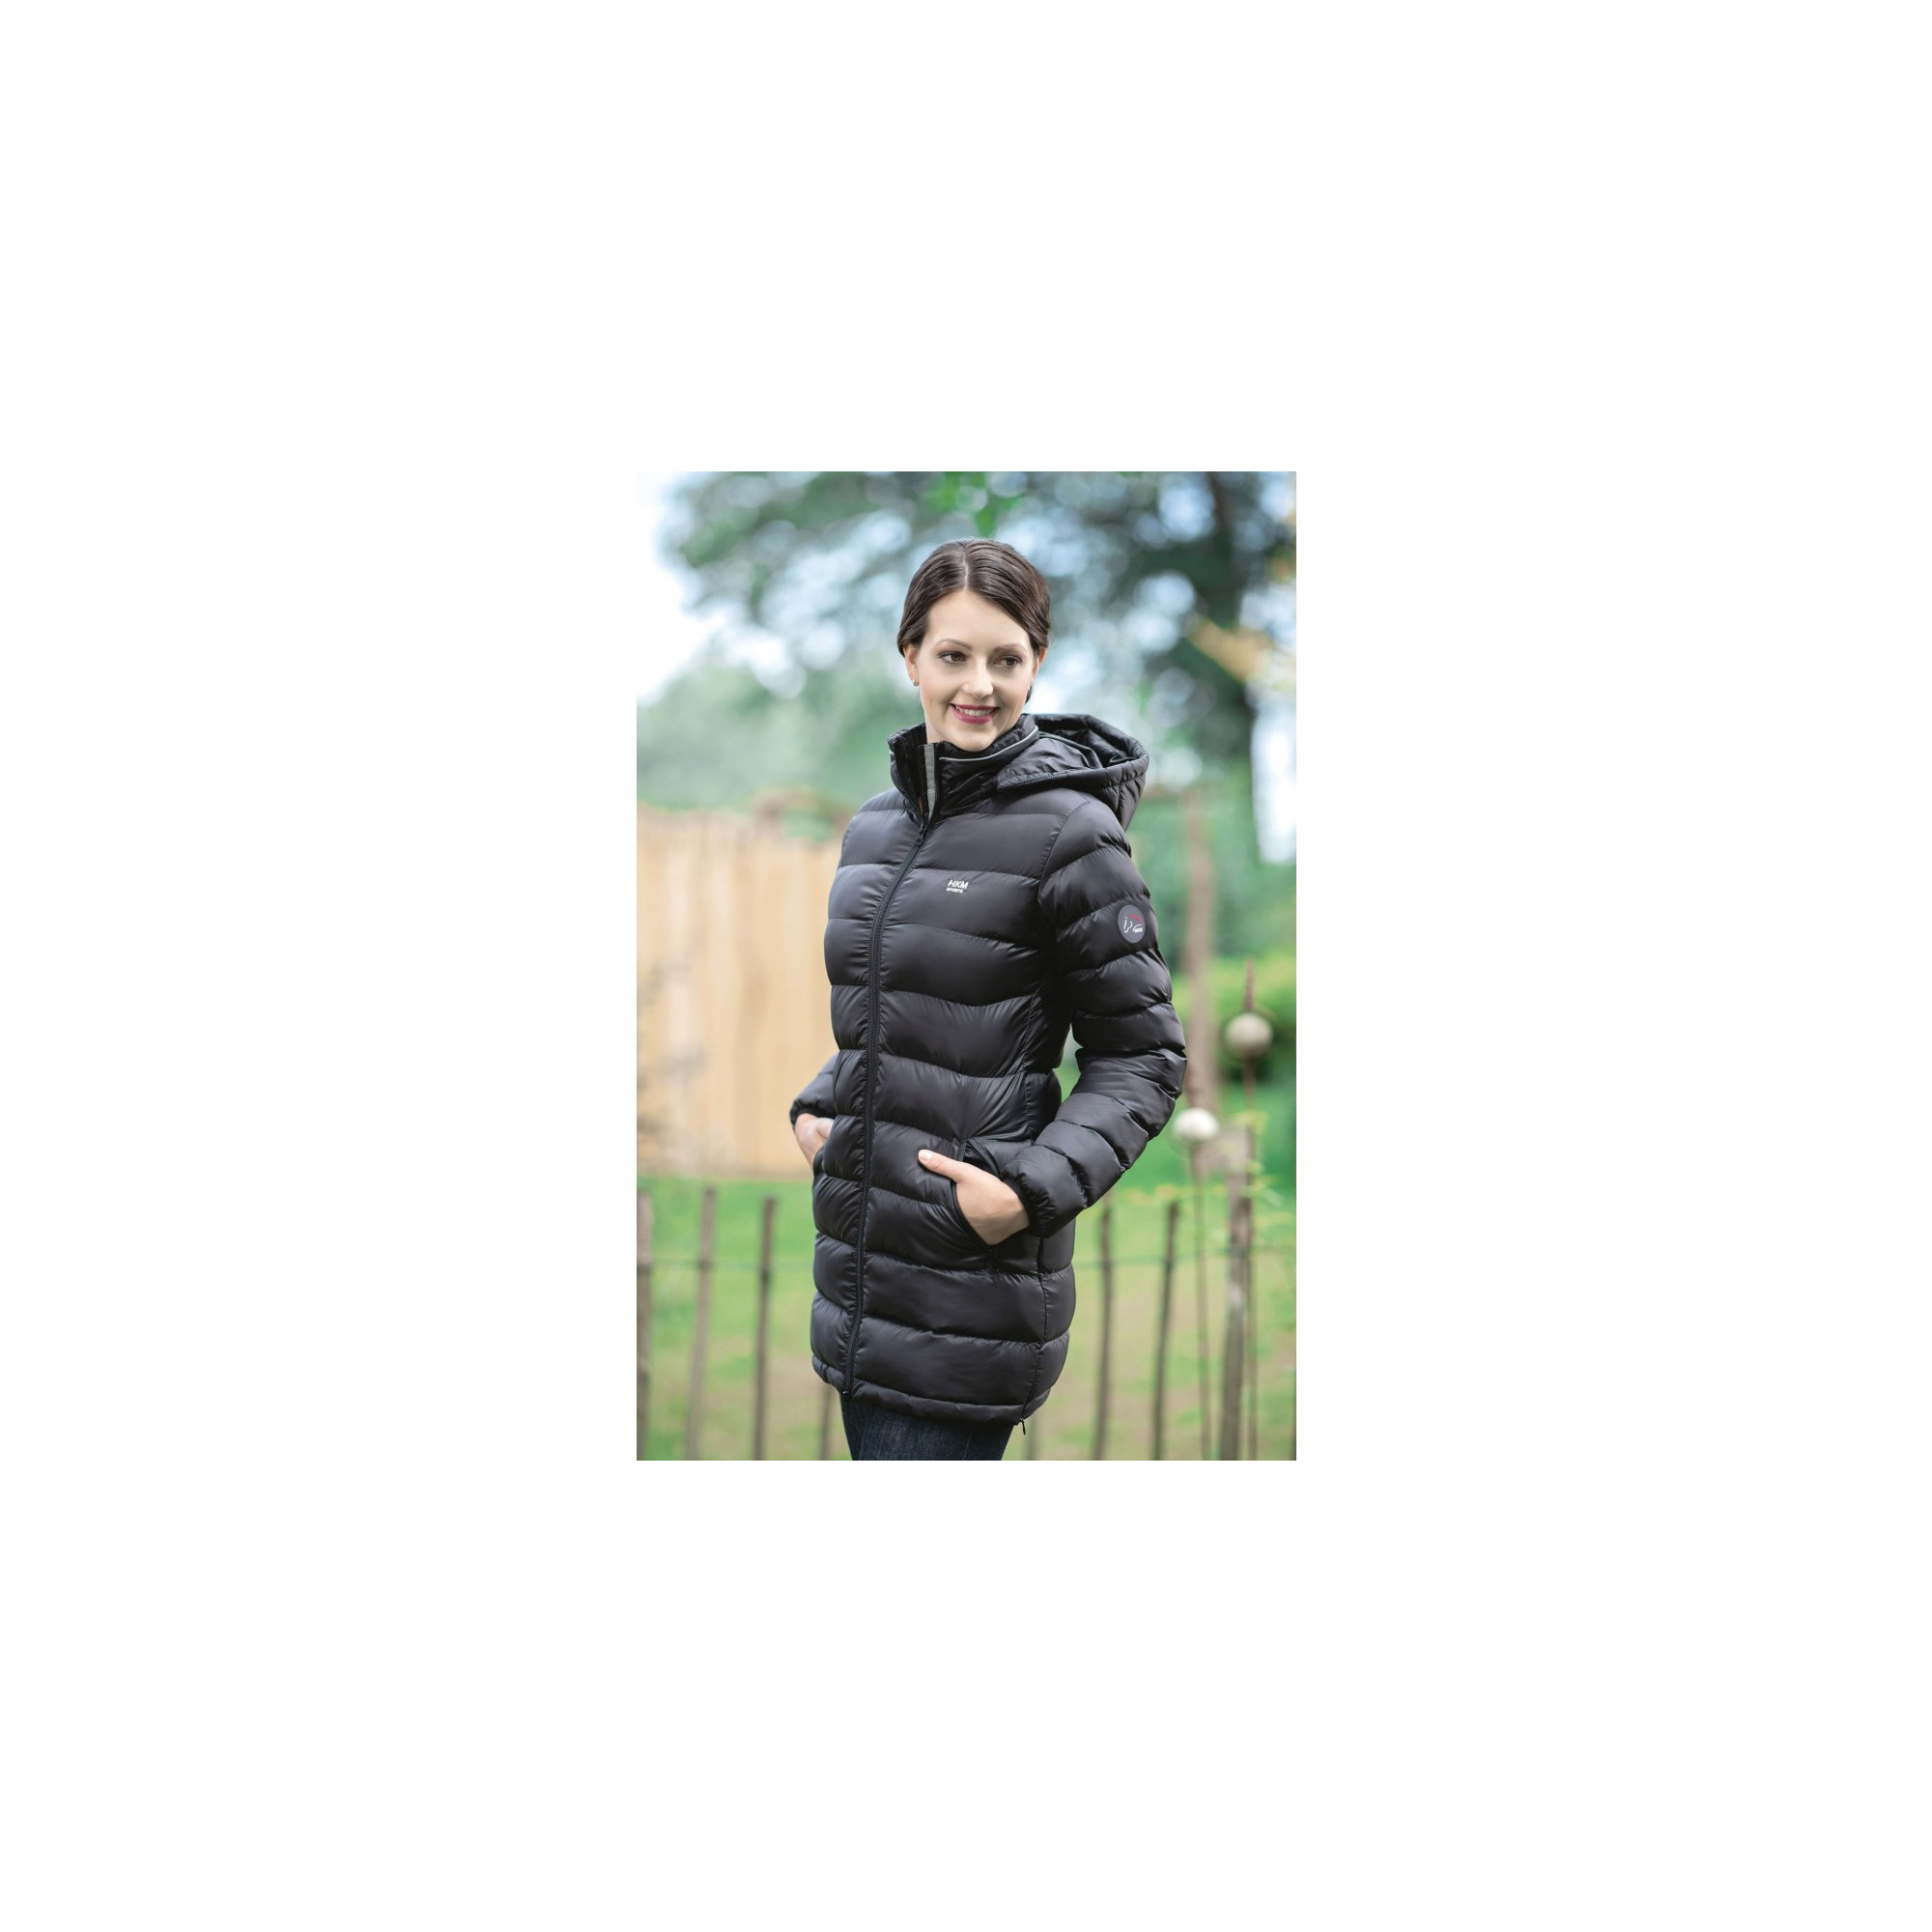 Women's Quilted Riding Jacket